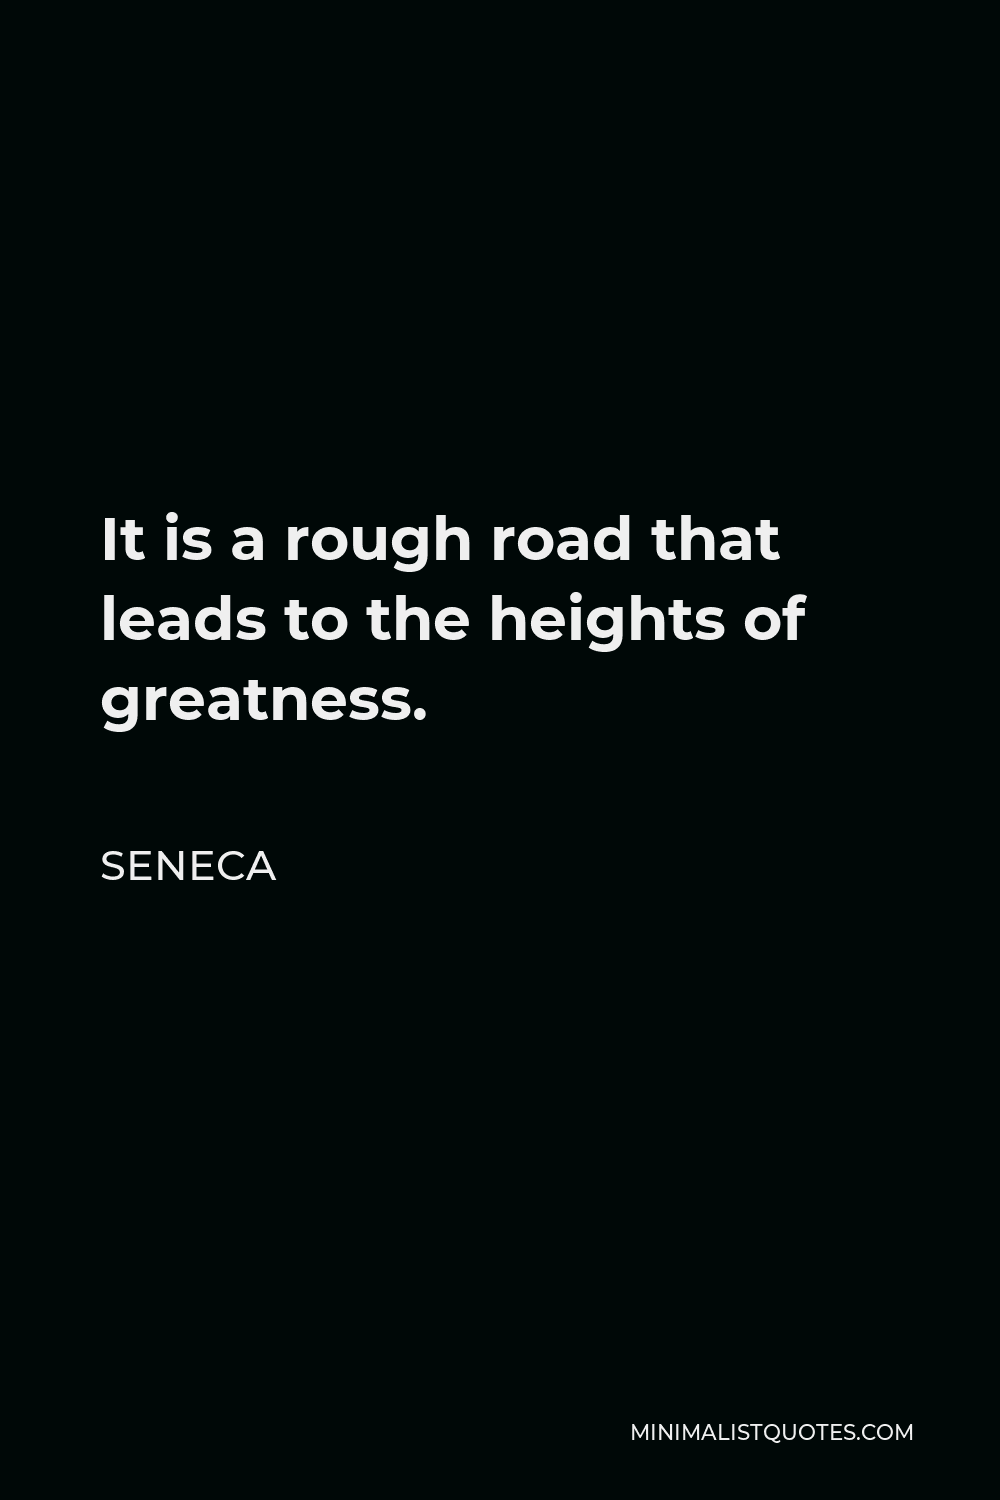 Seneca Quote - It is a rough road that leads to the heights of greatness.